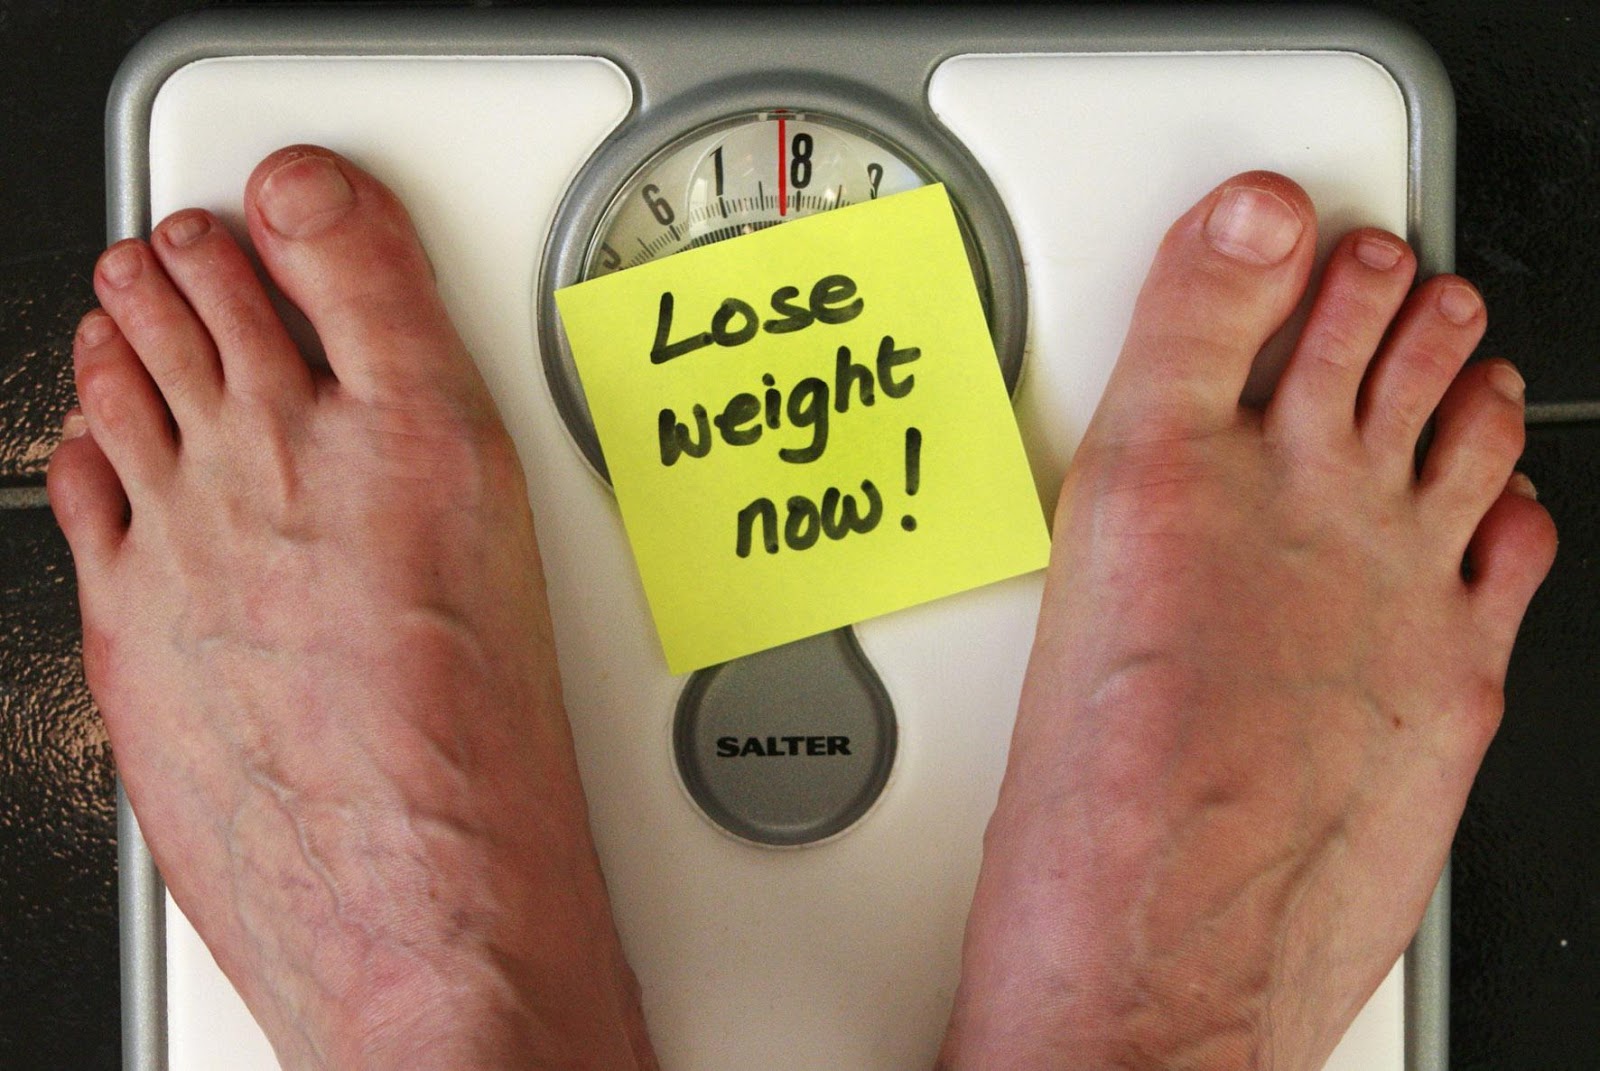 Trying to Lose Weight Here are the basic 10 Things No One Has Told You